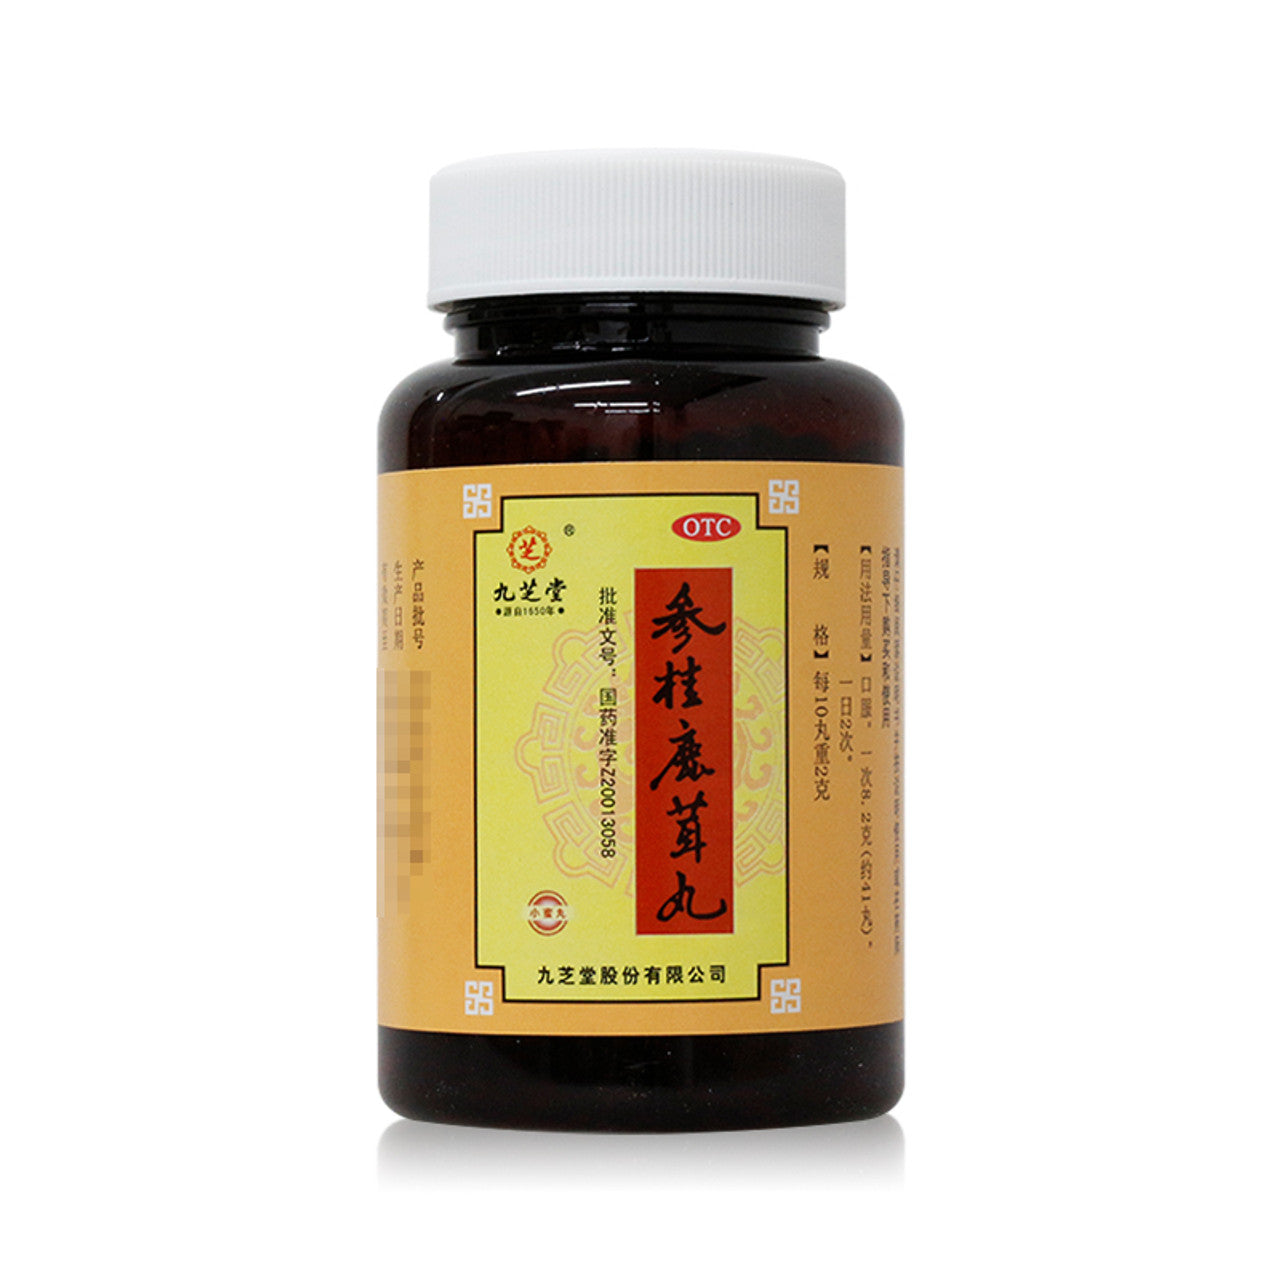 China Herb. Shengui Lurong Wan or Shengui Lurong Pills for weak physique, sore waist and knees, dizziness, tinnitus, spontaneous sweating, insomnia, dreaminess, cold kidney, cold uterine zone, irregular menstruation. Shen Gui Lu Rong Wan